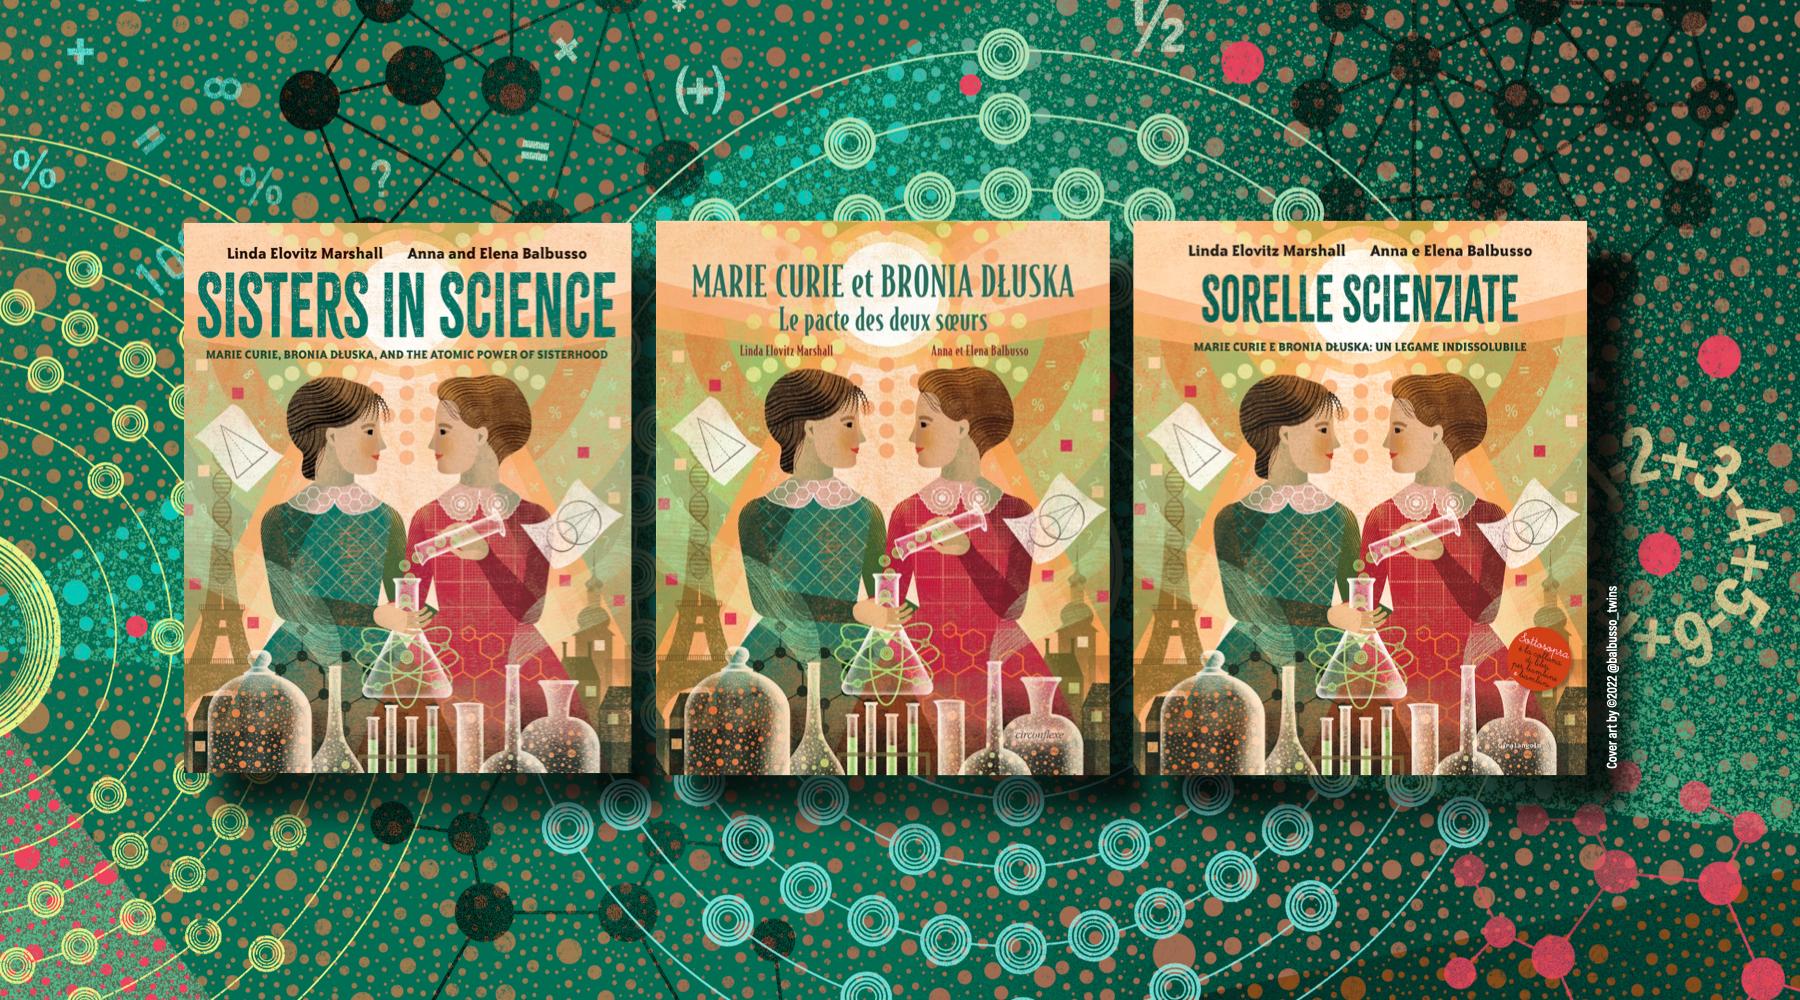 New Italian and French editions